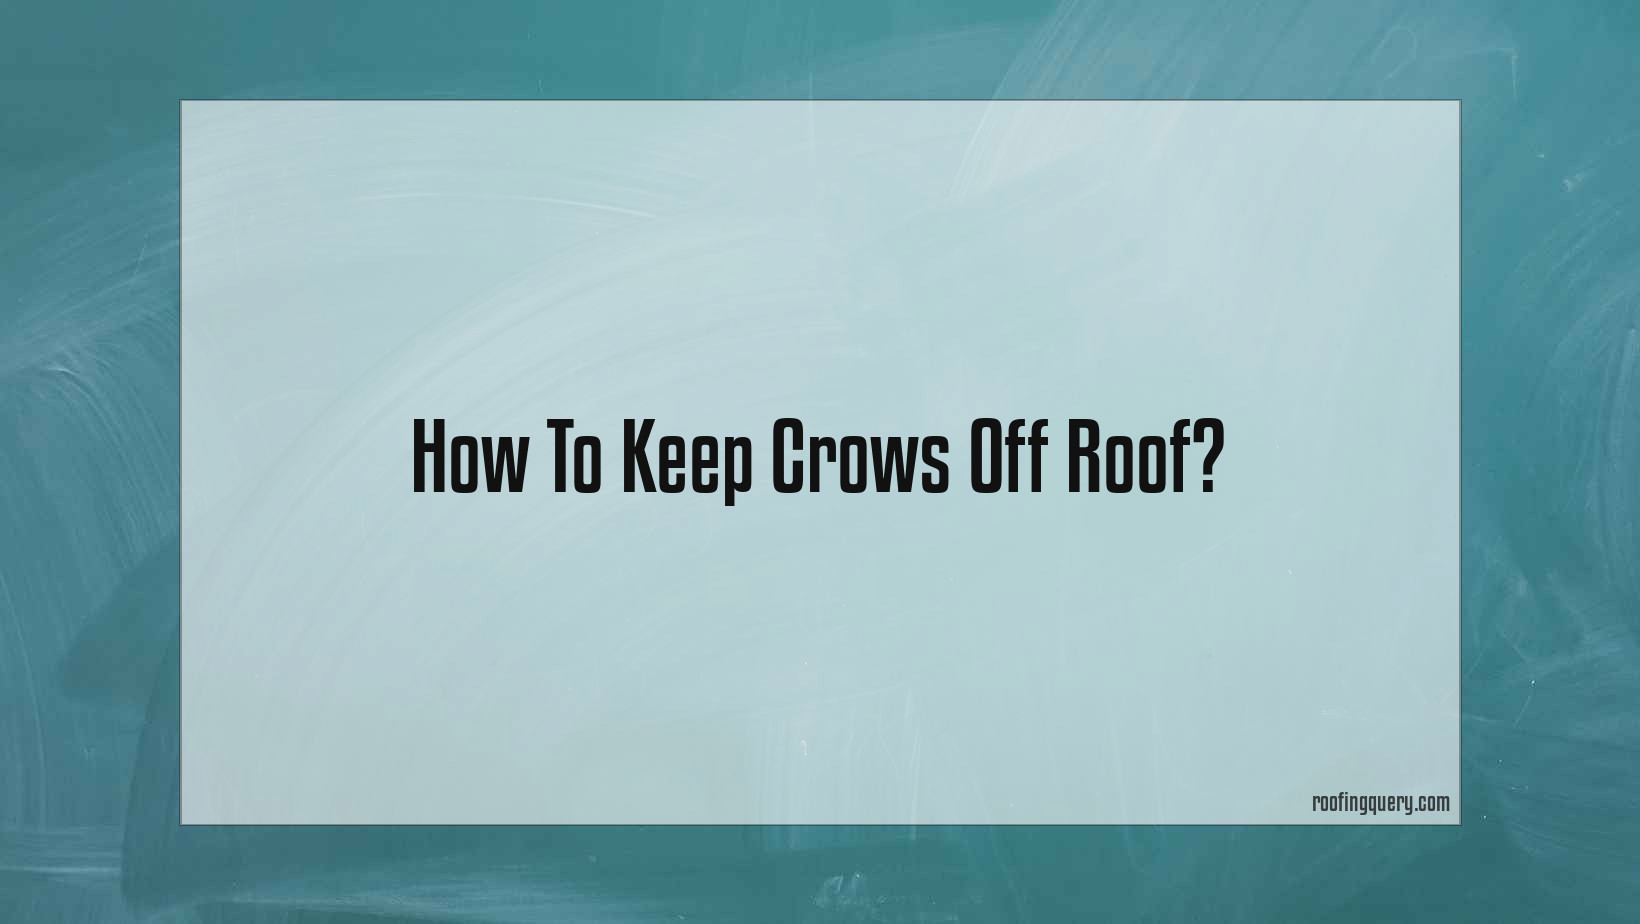 How To Keep Crows Off Roof?